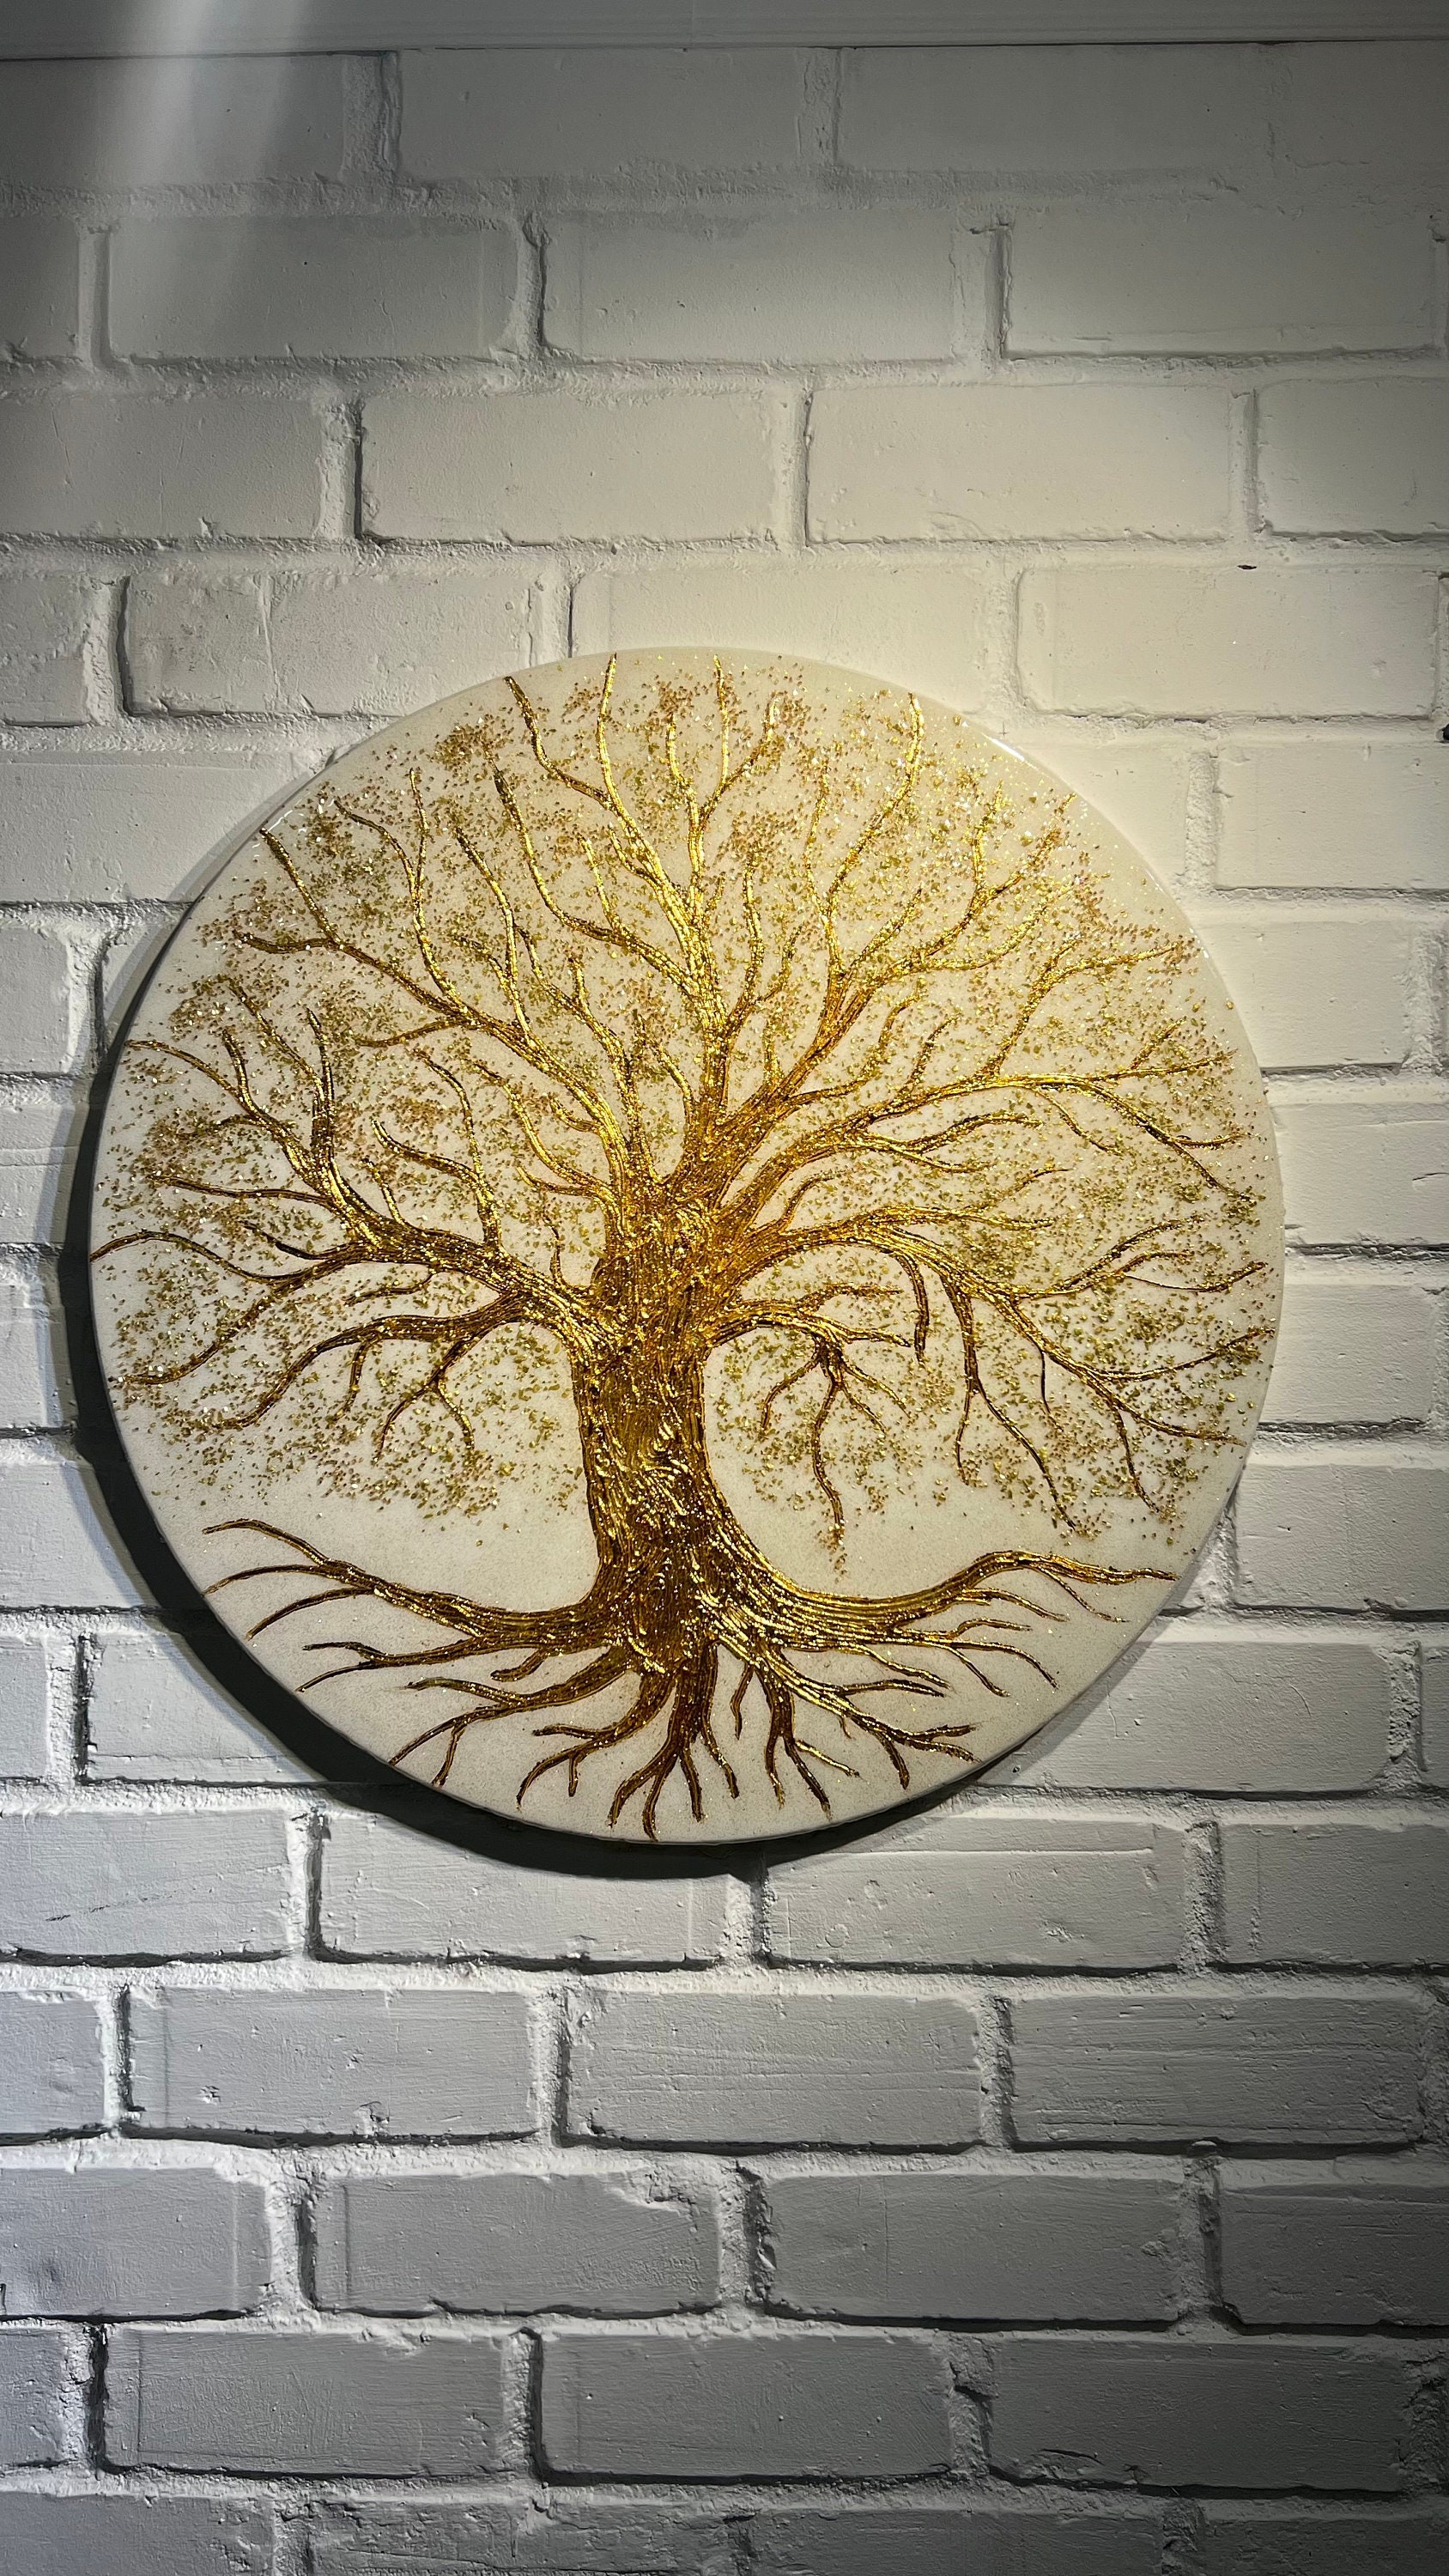 Tree of Life Stencil, Reusable Tree of Life Stencils for Painting, Tree  Stencils Small & Large, Tree of Life Design, Large Tree Stencils 